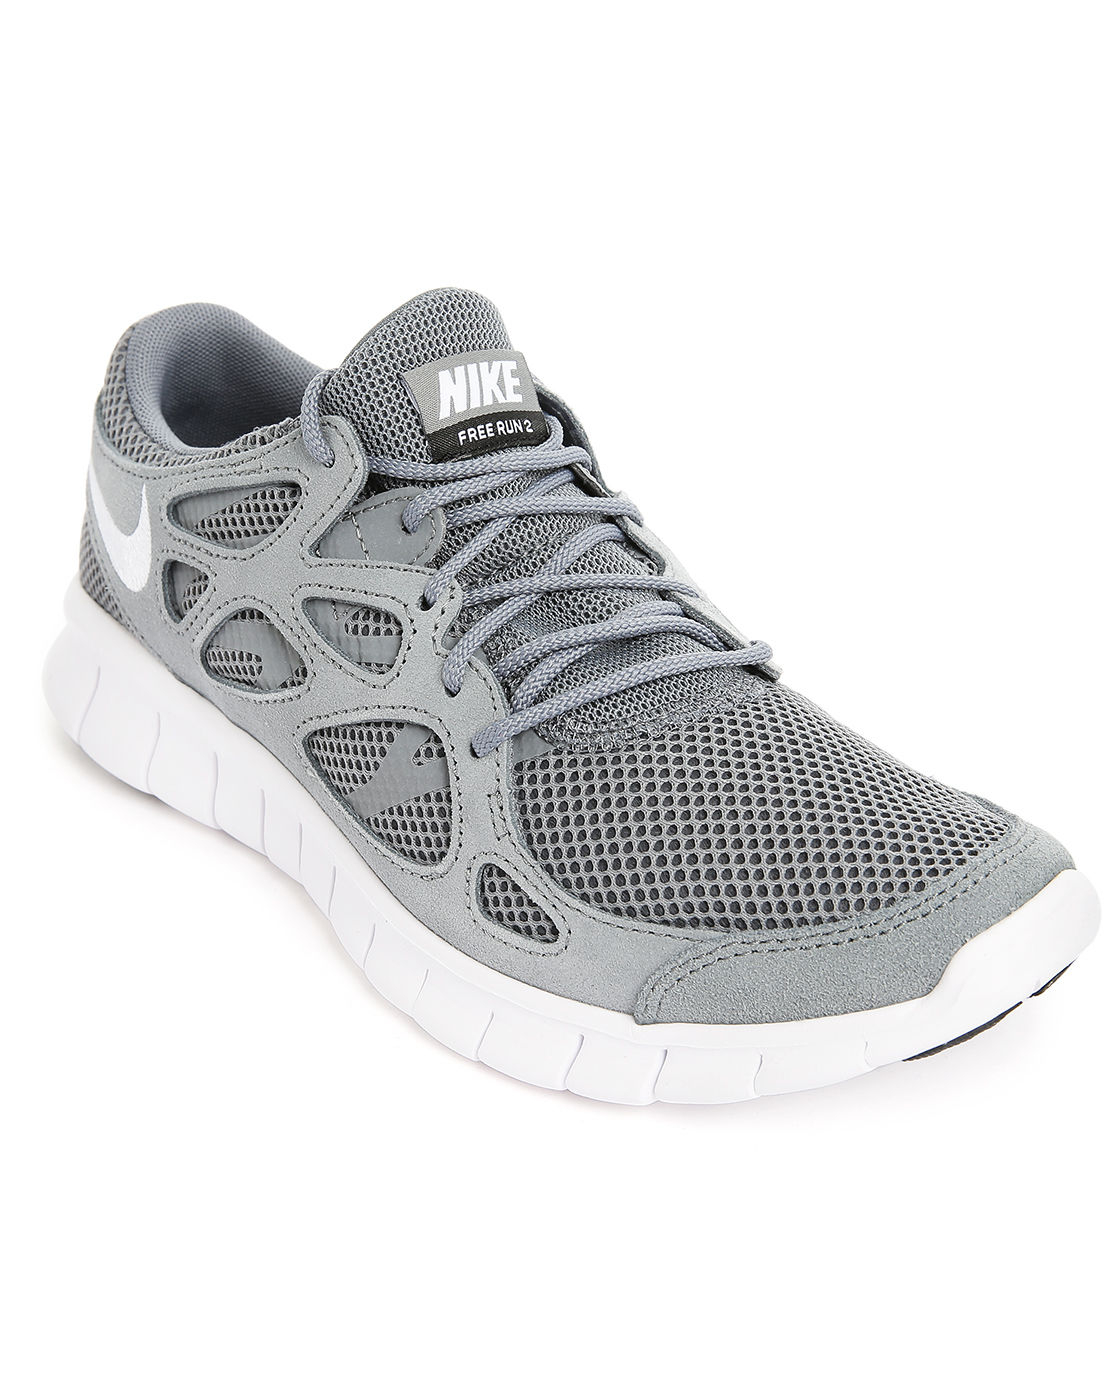 Nike Grey Free Run 2.0 Suede And Mesh Sneakers in Gray for